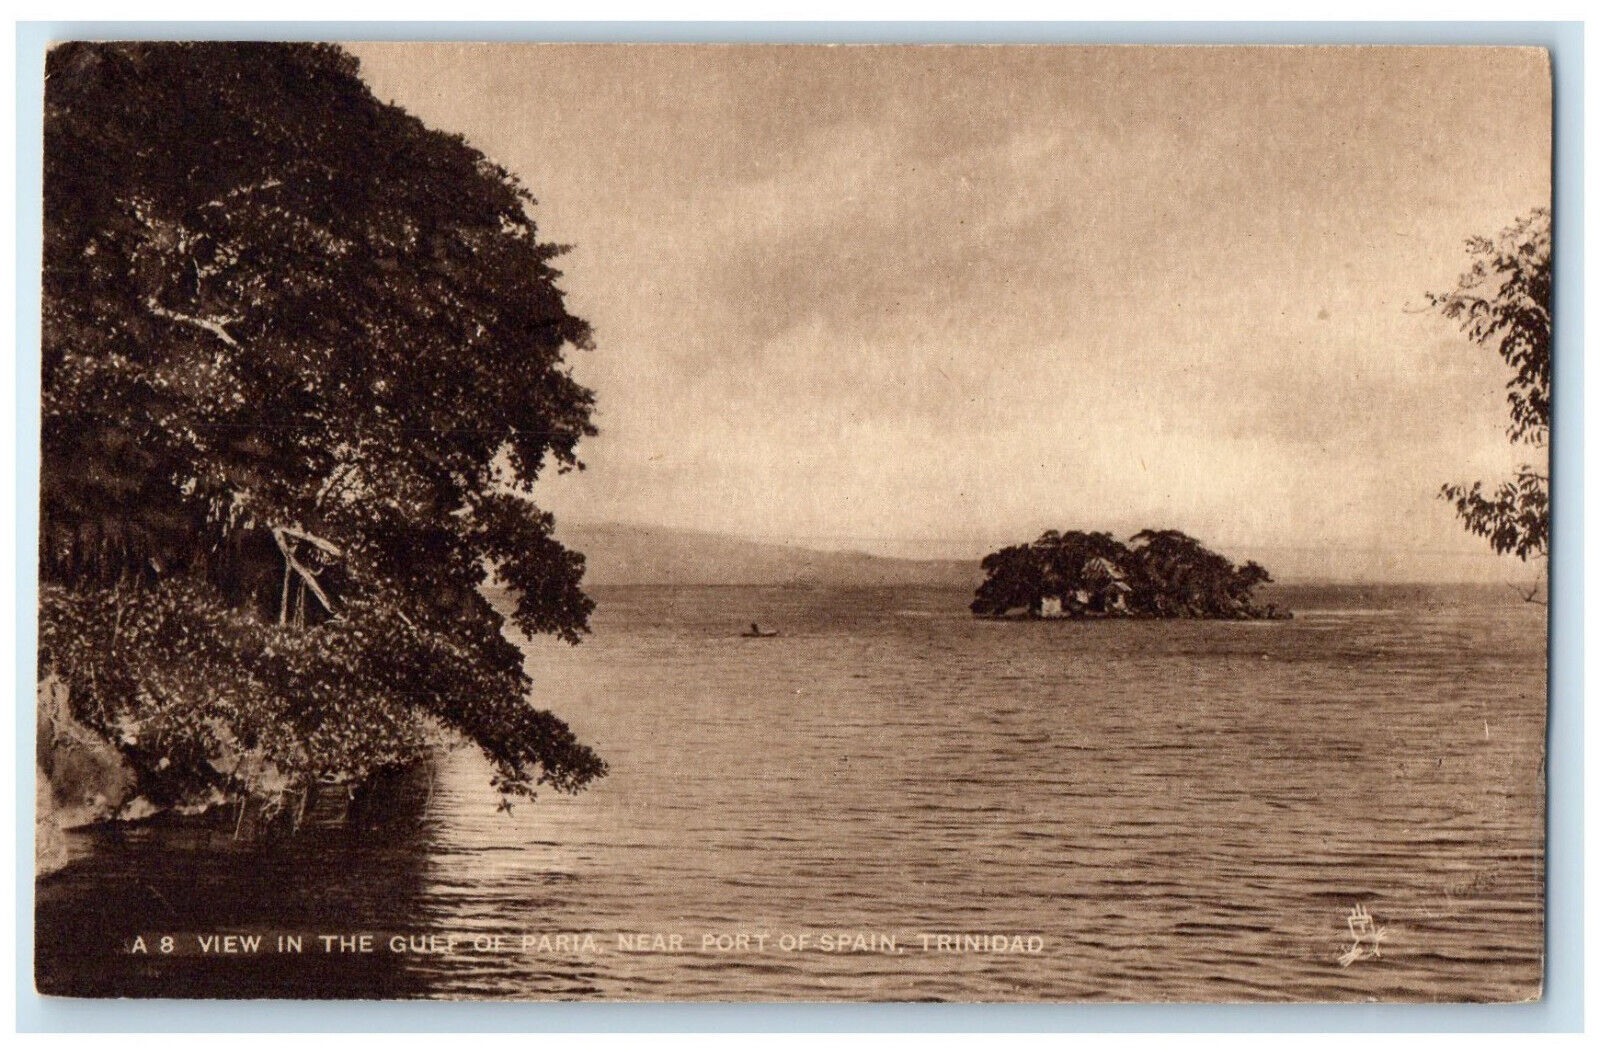 c1910 View in Gulf of Paria Near Port of Spain Trinidad and Tobago Postcard